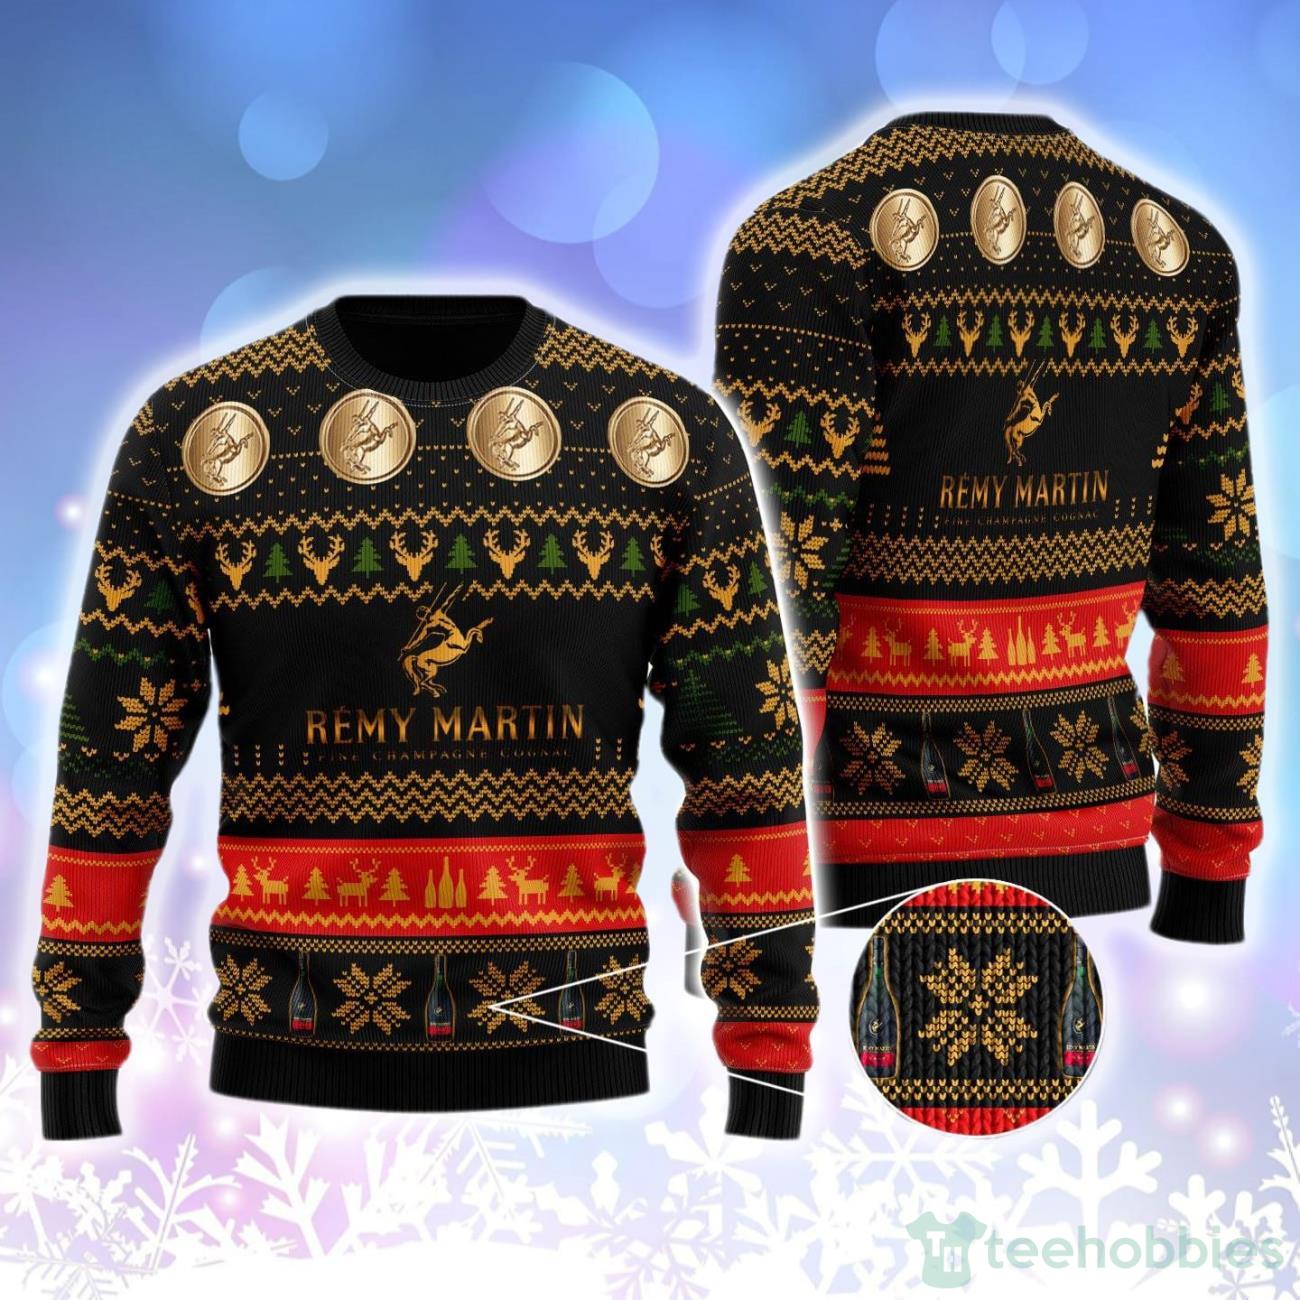 Remy Martin Ugly Christmas Sweater Product Photo 1